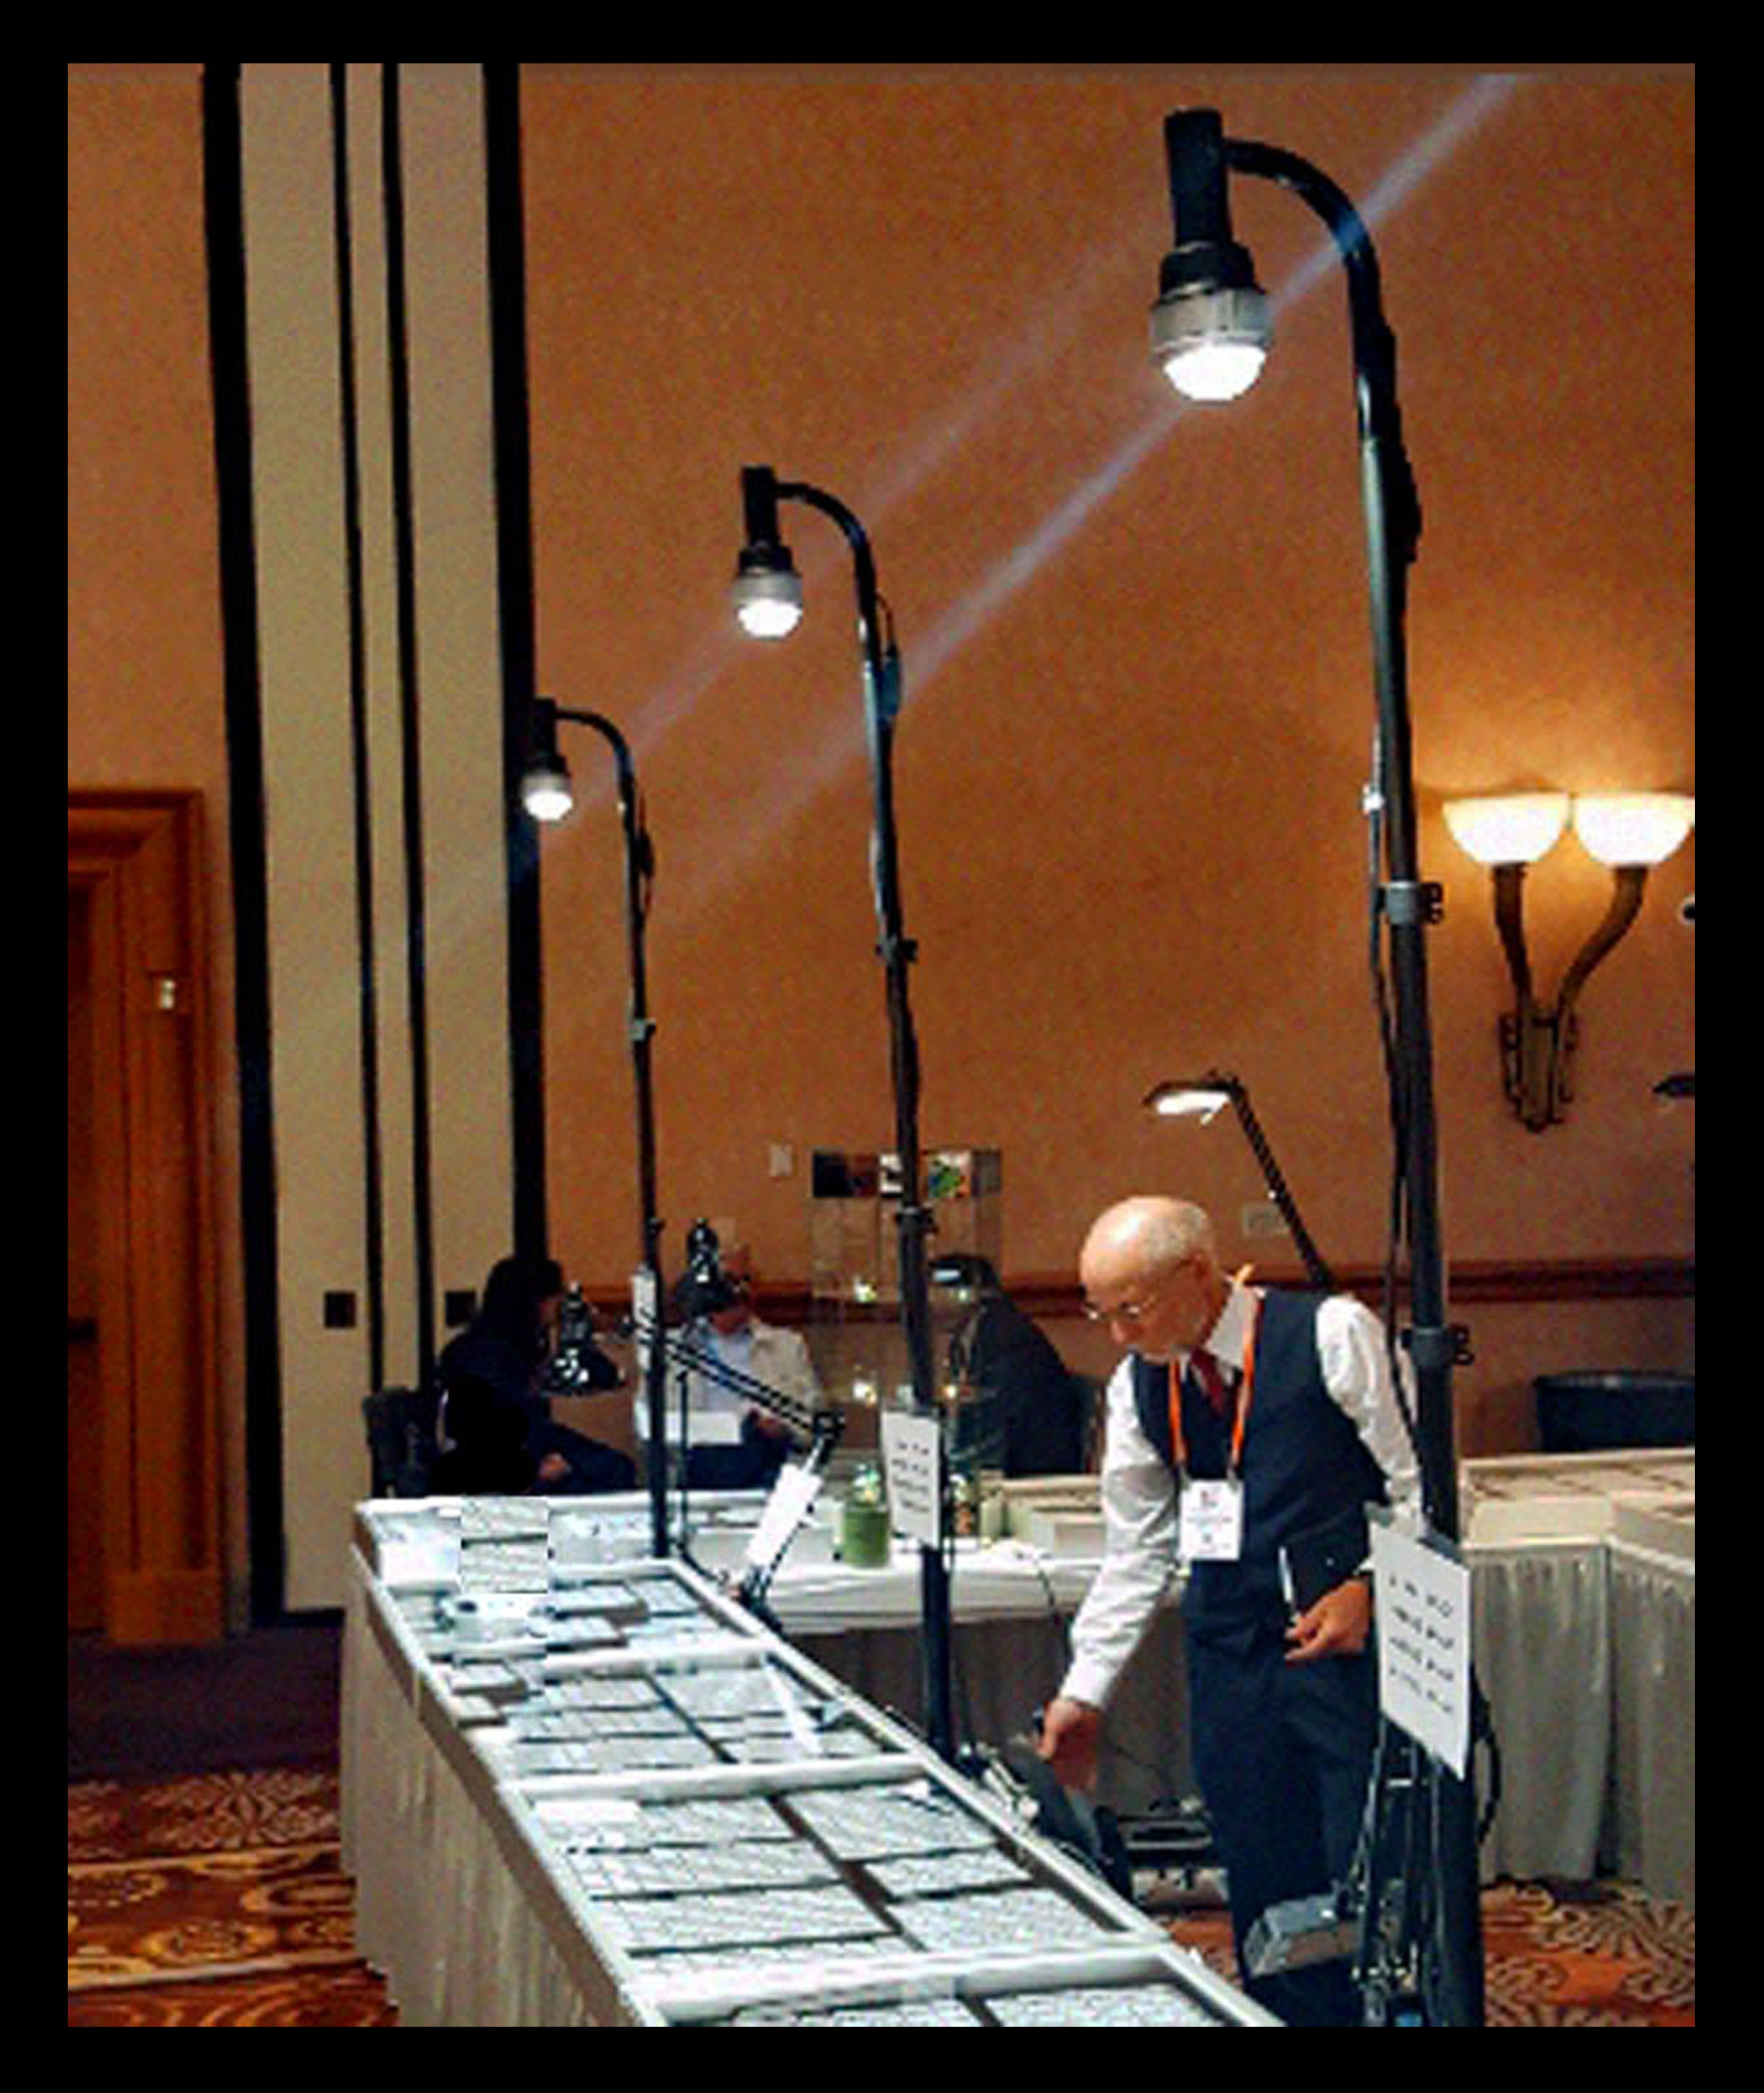 Led jewelry lighting trade show vendor booth with portable LED lighting